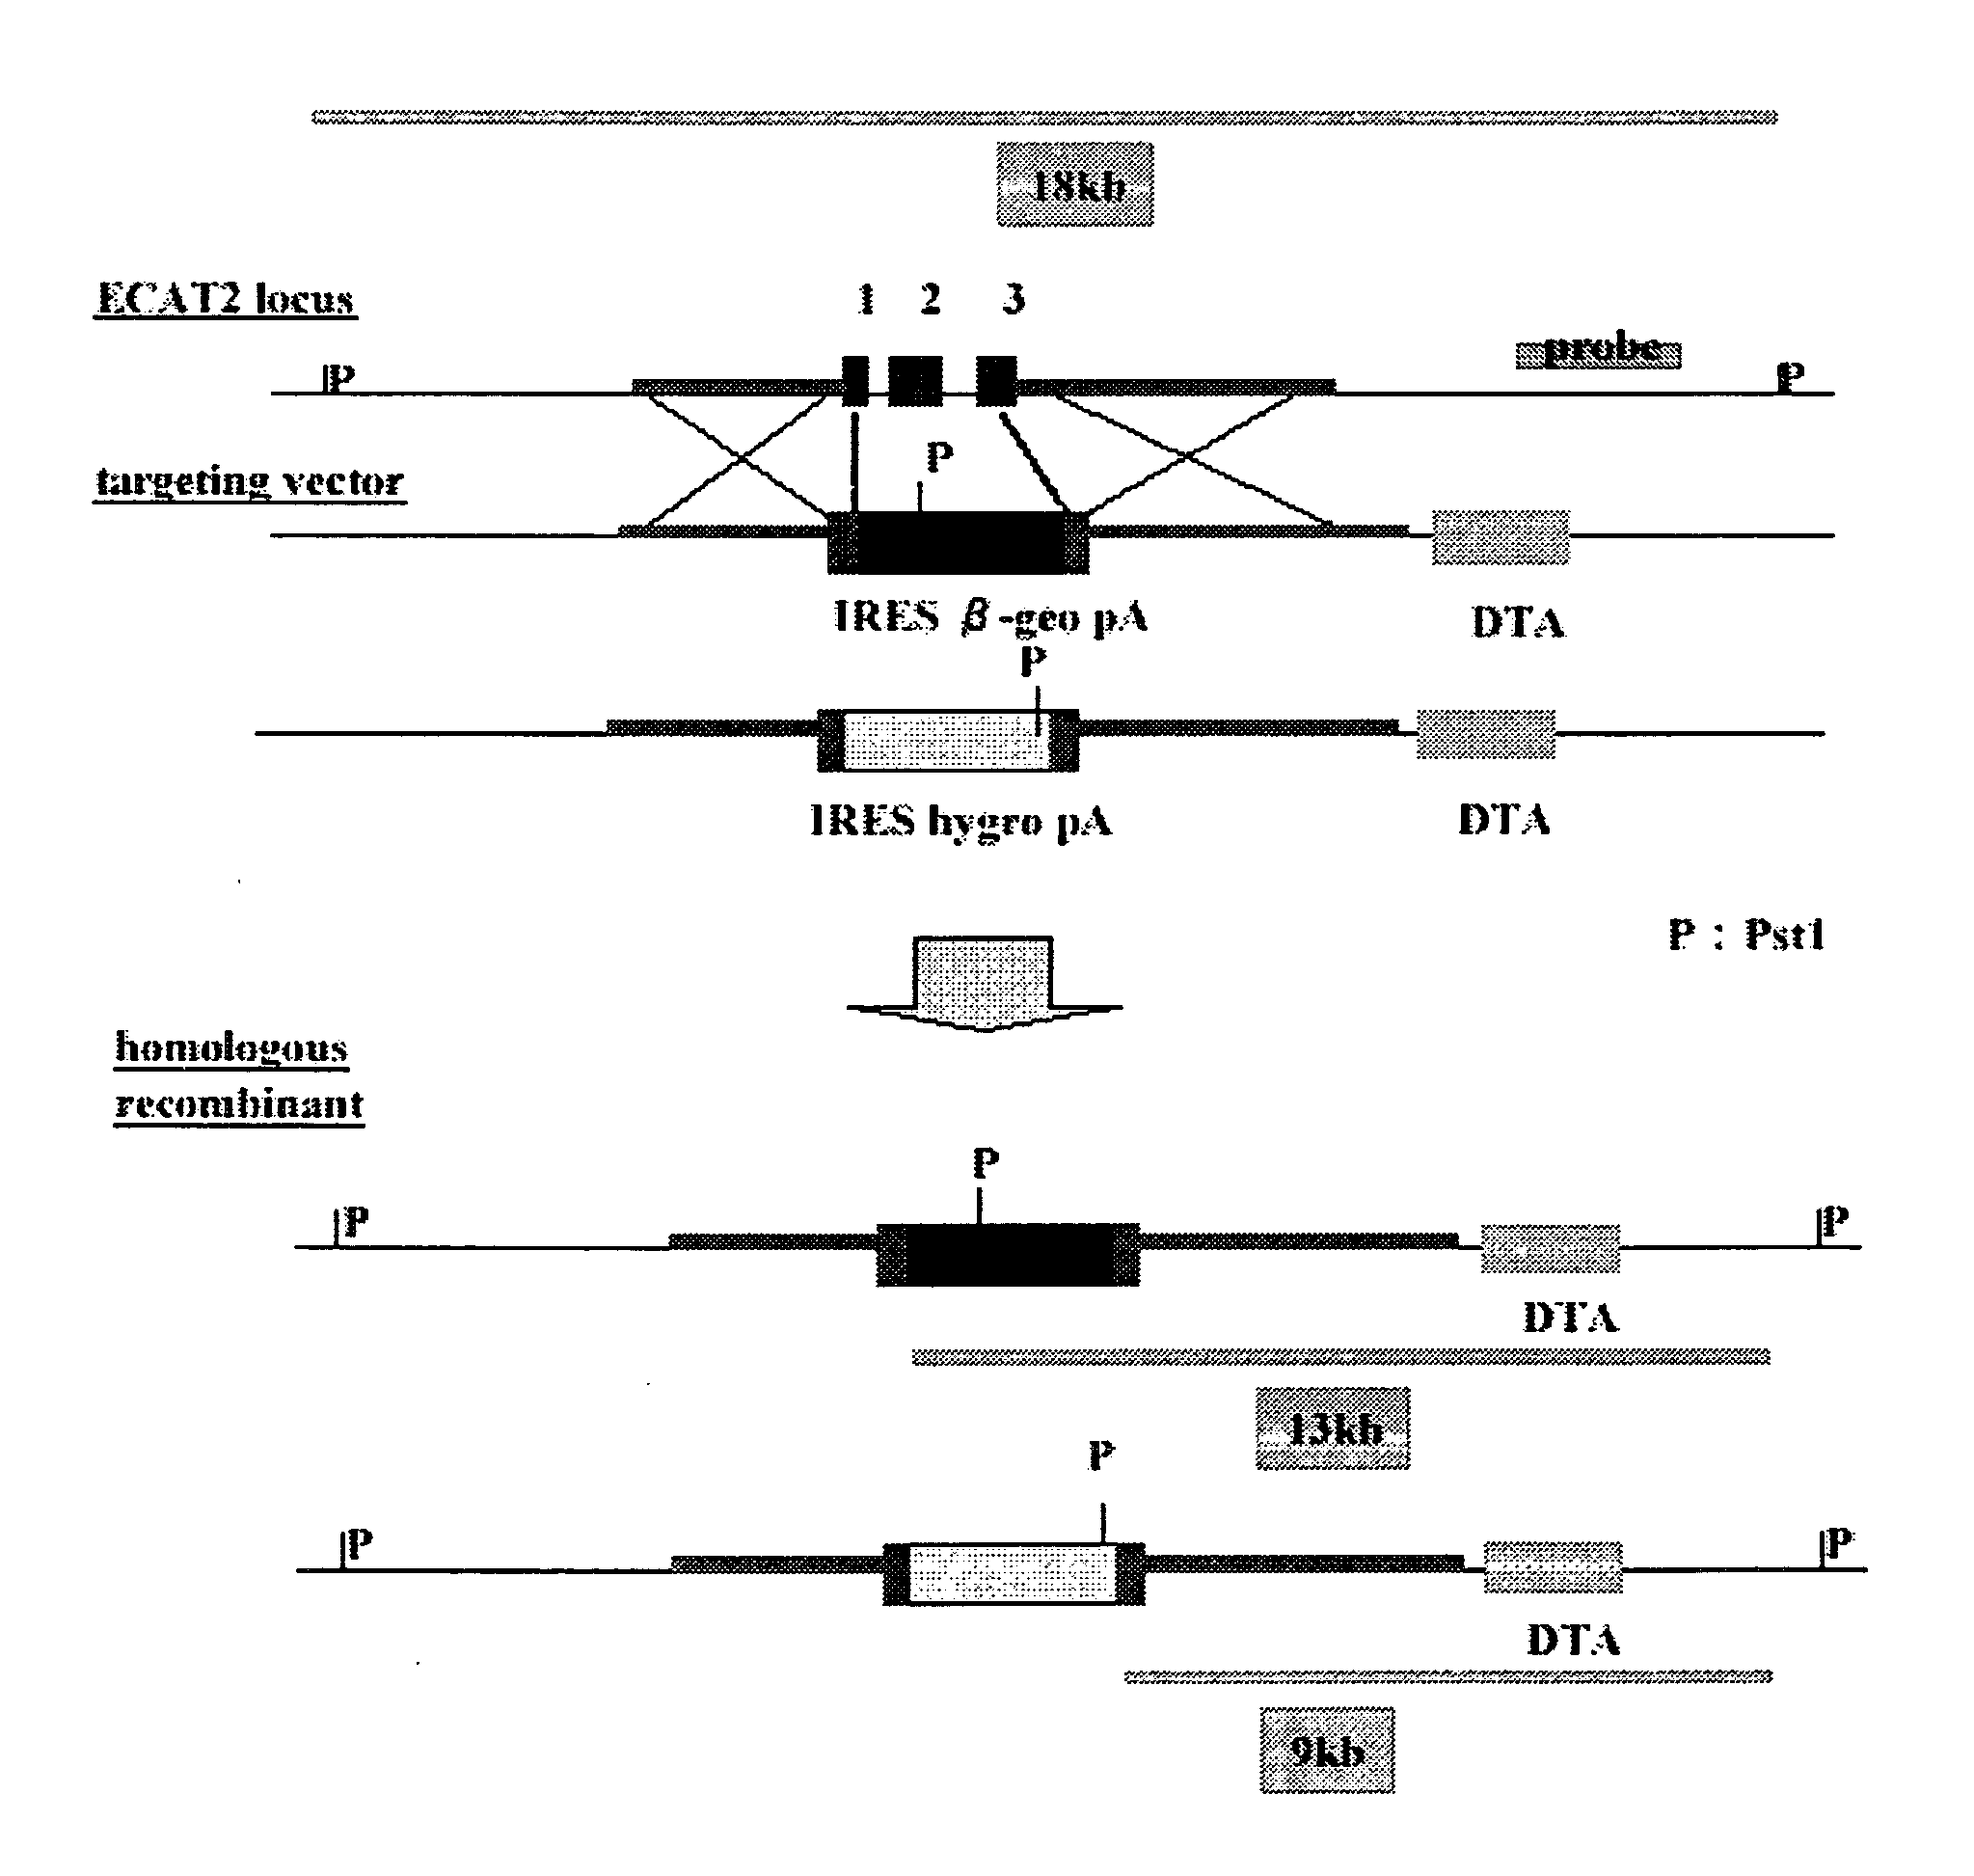 Screening Method for Somatic Cell Nuclear Reprogramming Substance